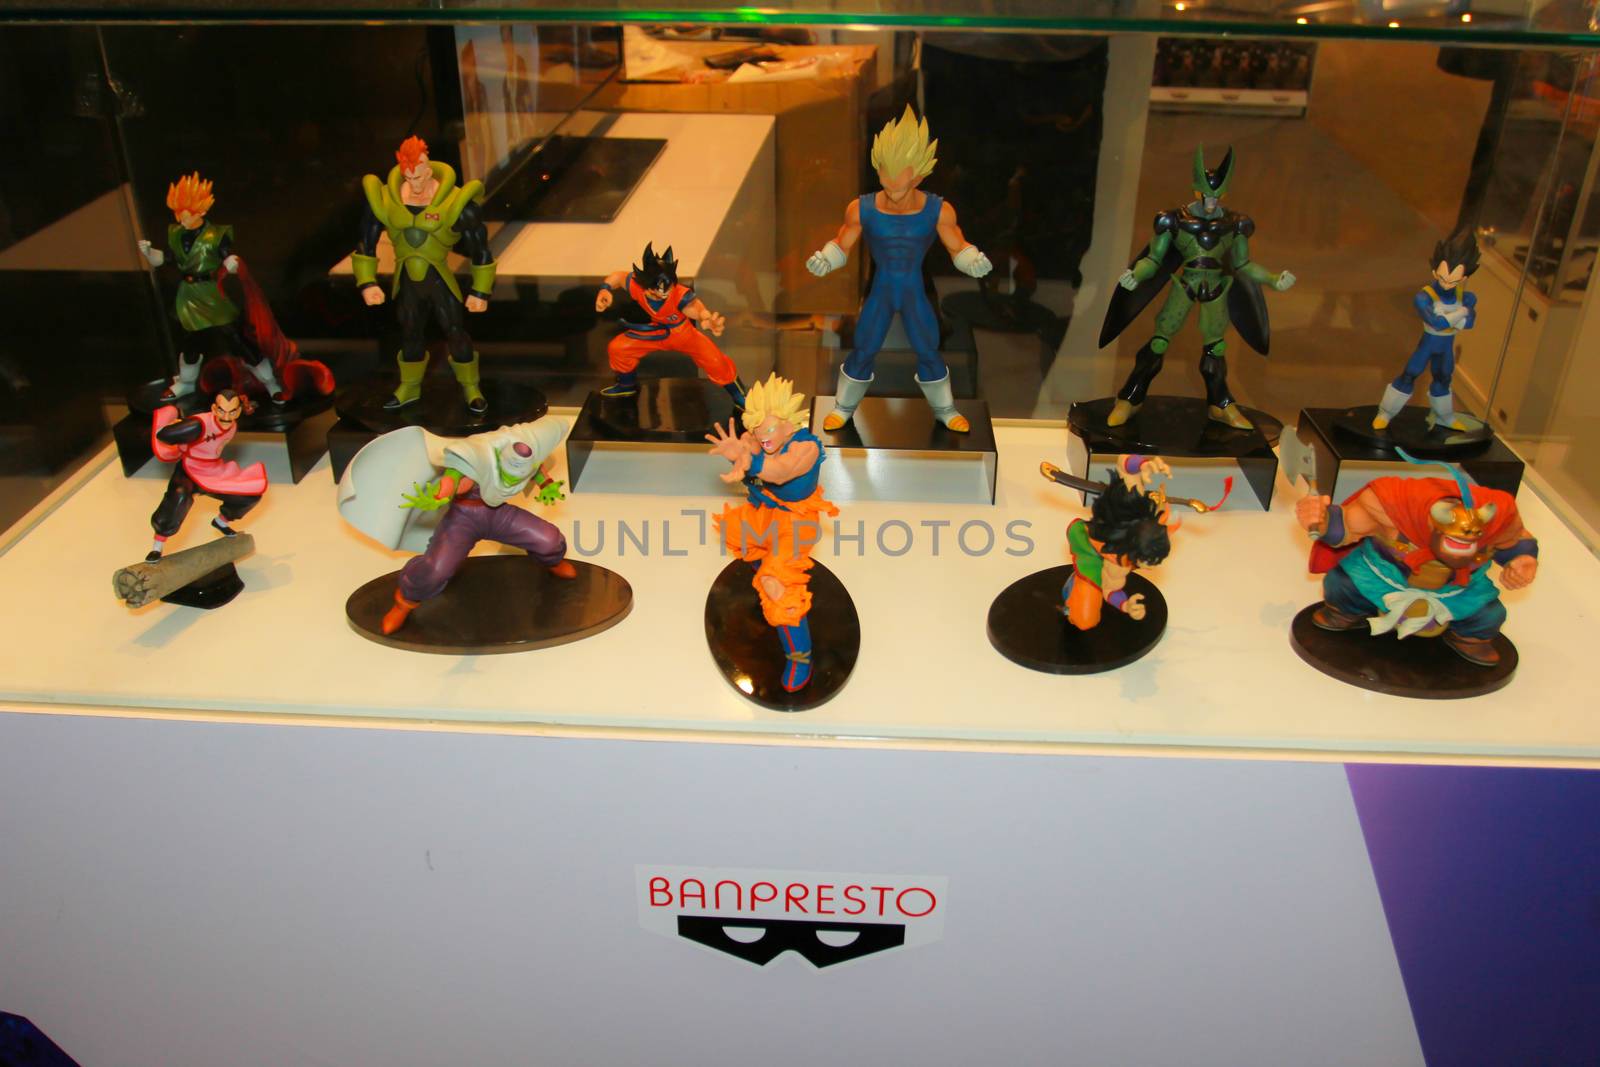 A model of the character DragonBall from the movies and comics  by redthirteen